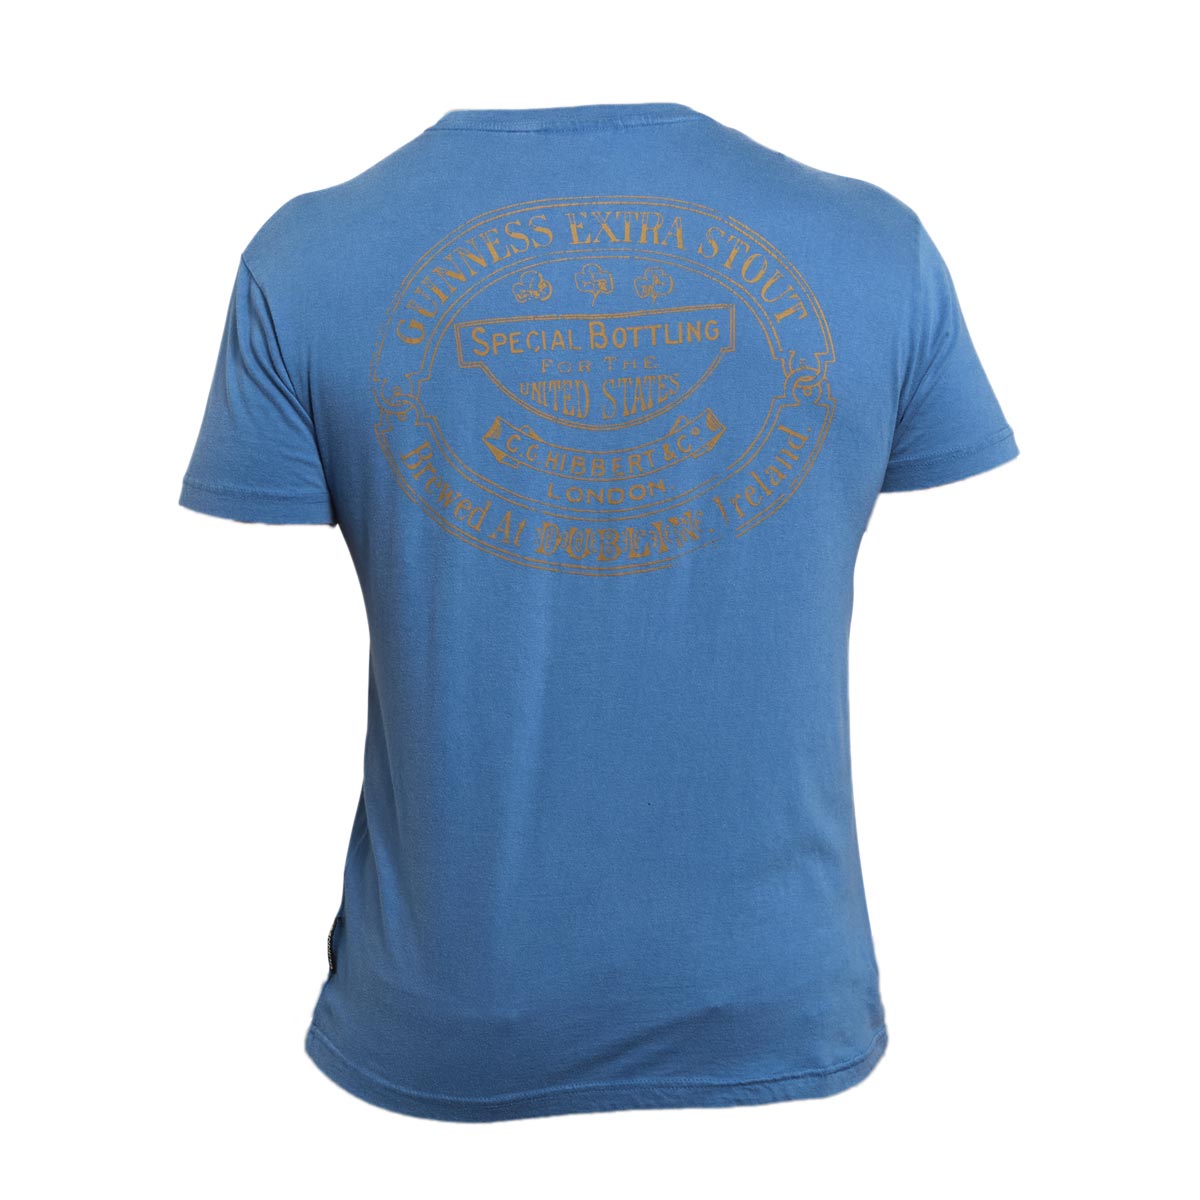 The back of a Guinness Trademark Label T-Shirt Blue with a Guinness logo on it.